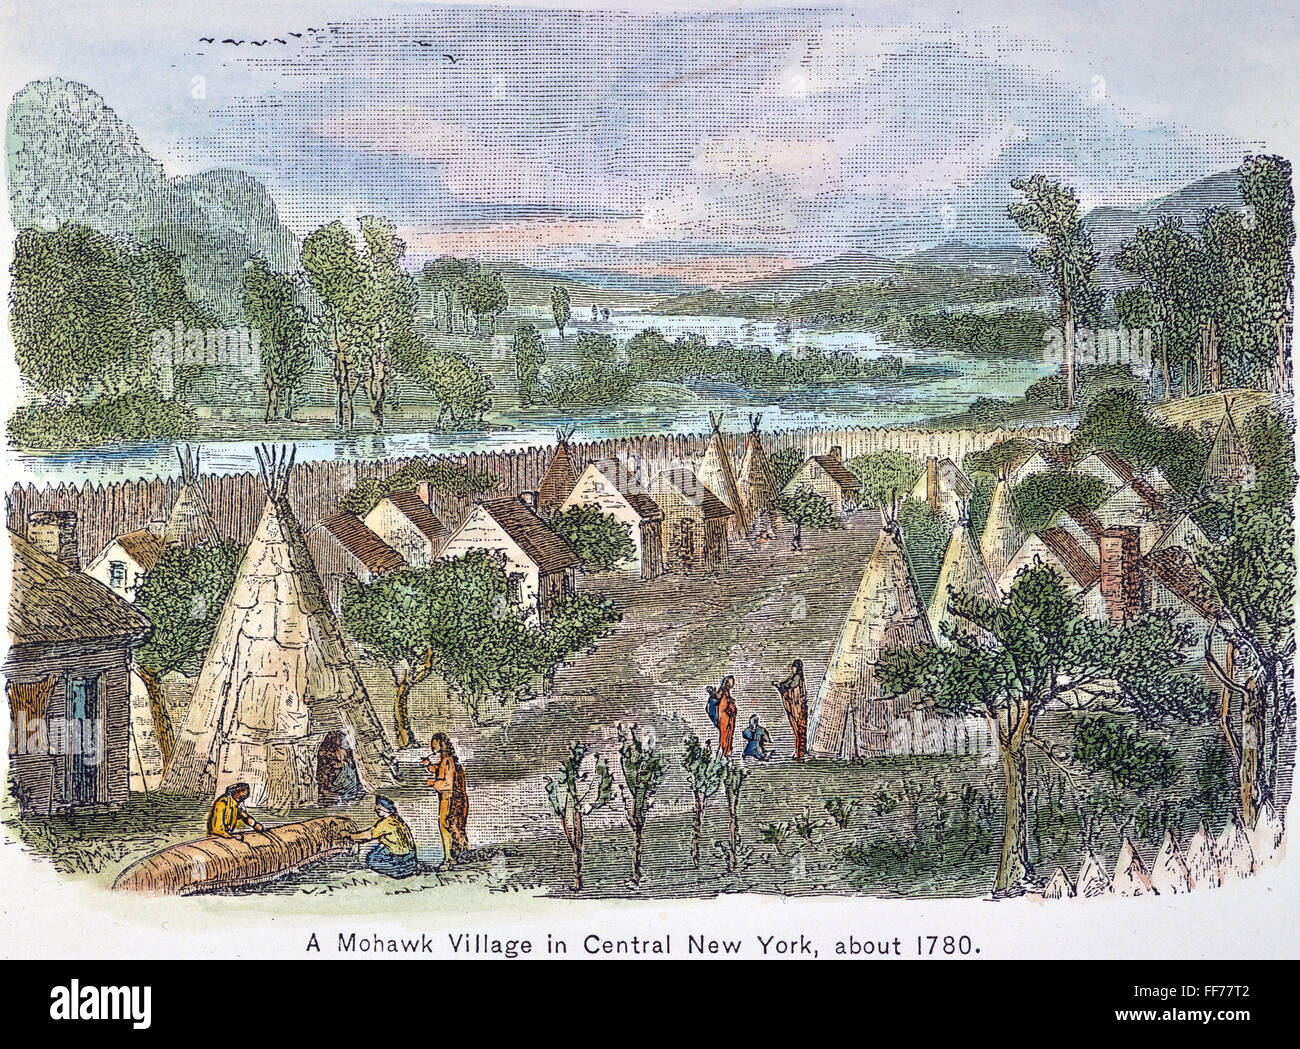 MOHAWK VILLAGE, 1780. /nA Mohawk Native American village in central New York, c1780. Engraving, 19th century. Stock Photo